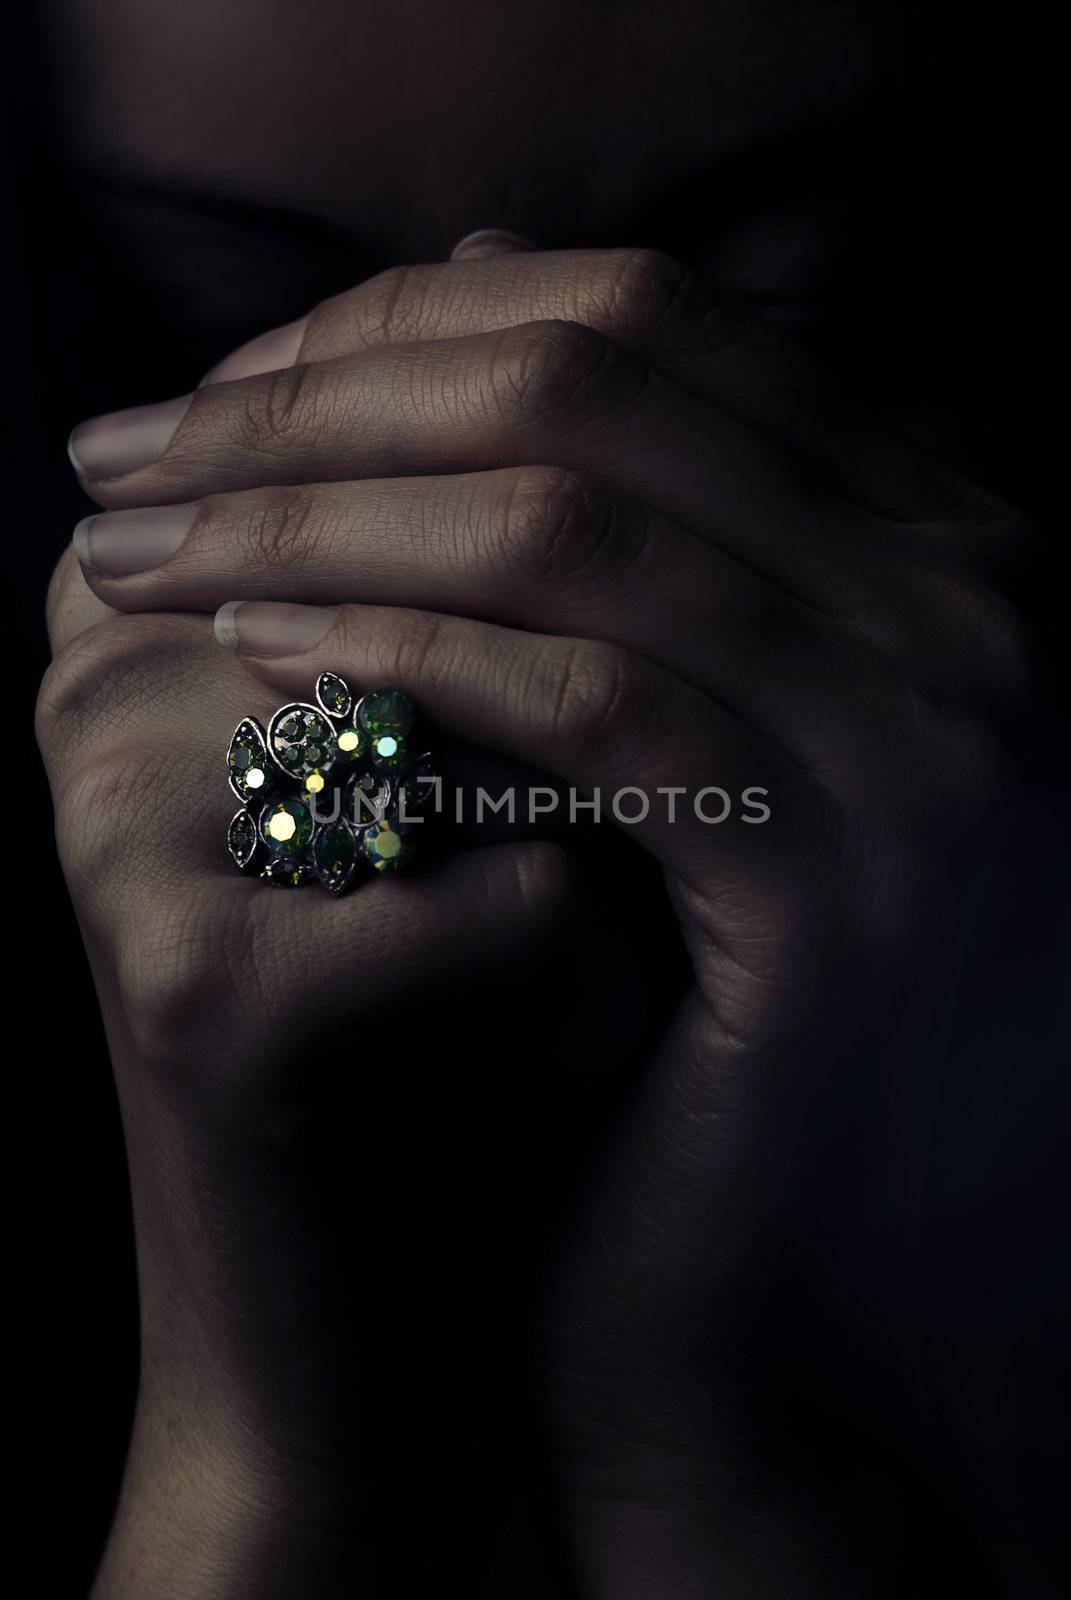 Studio portrait of model's hands with jewel ring in dramatic light